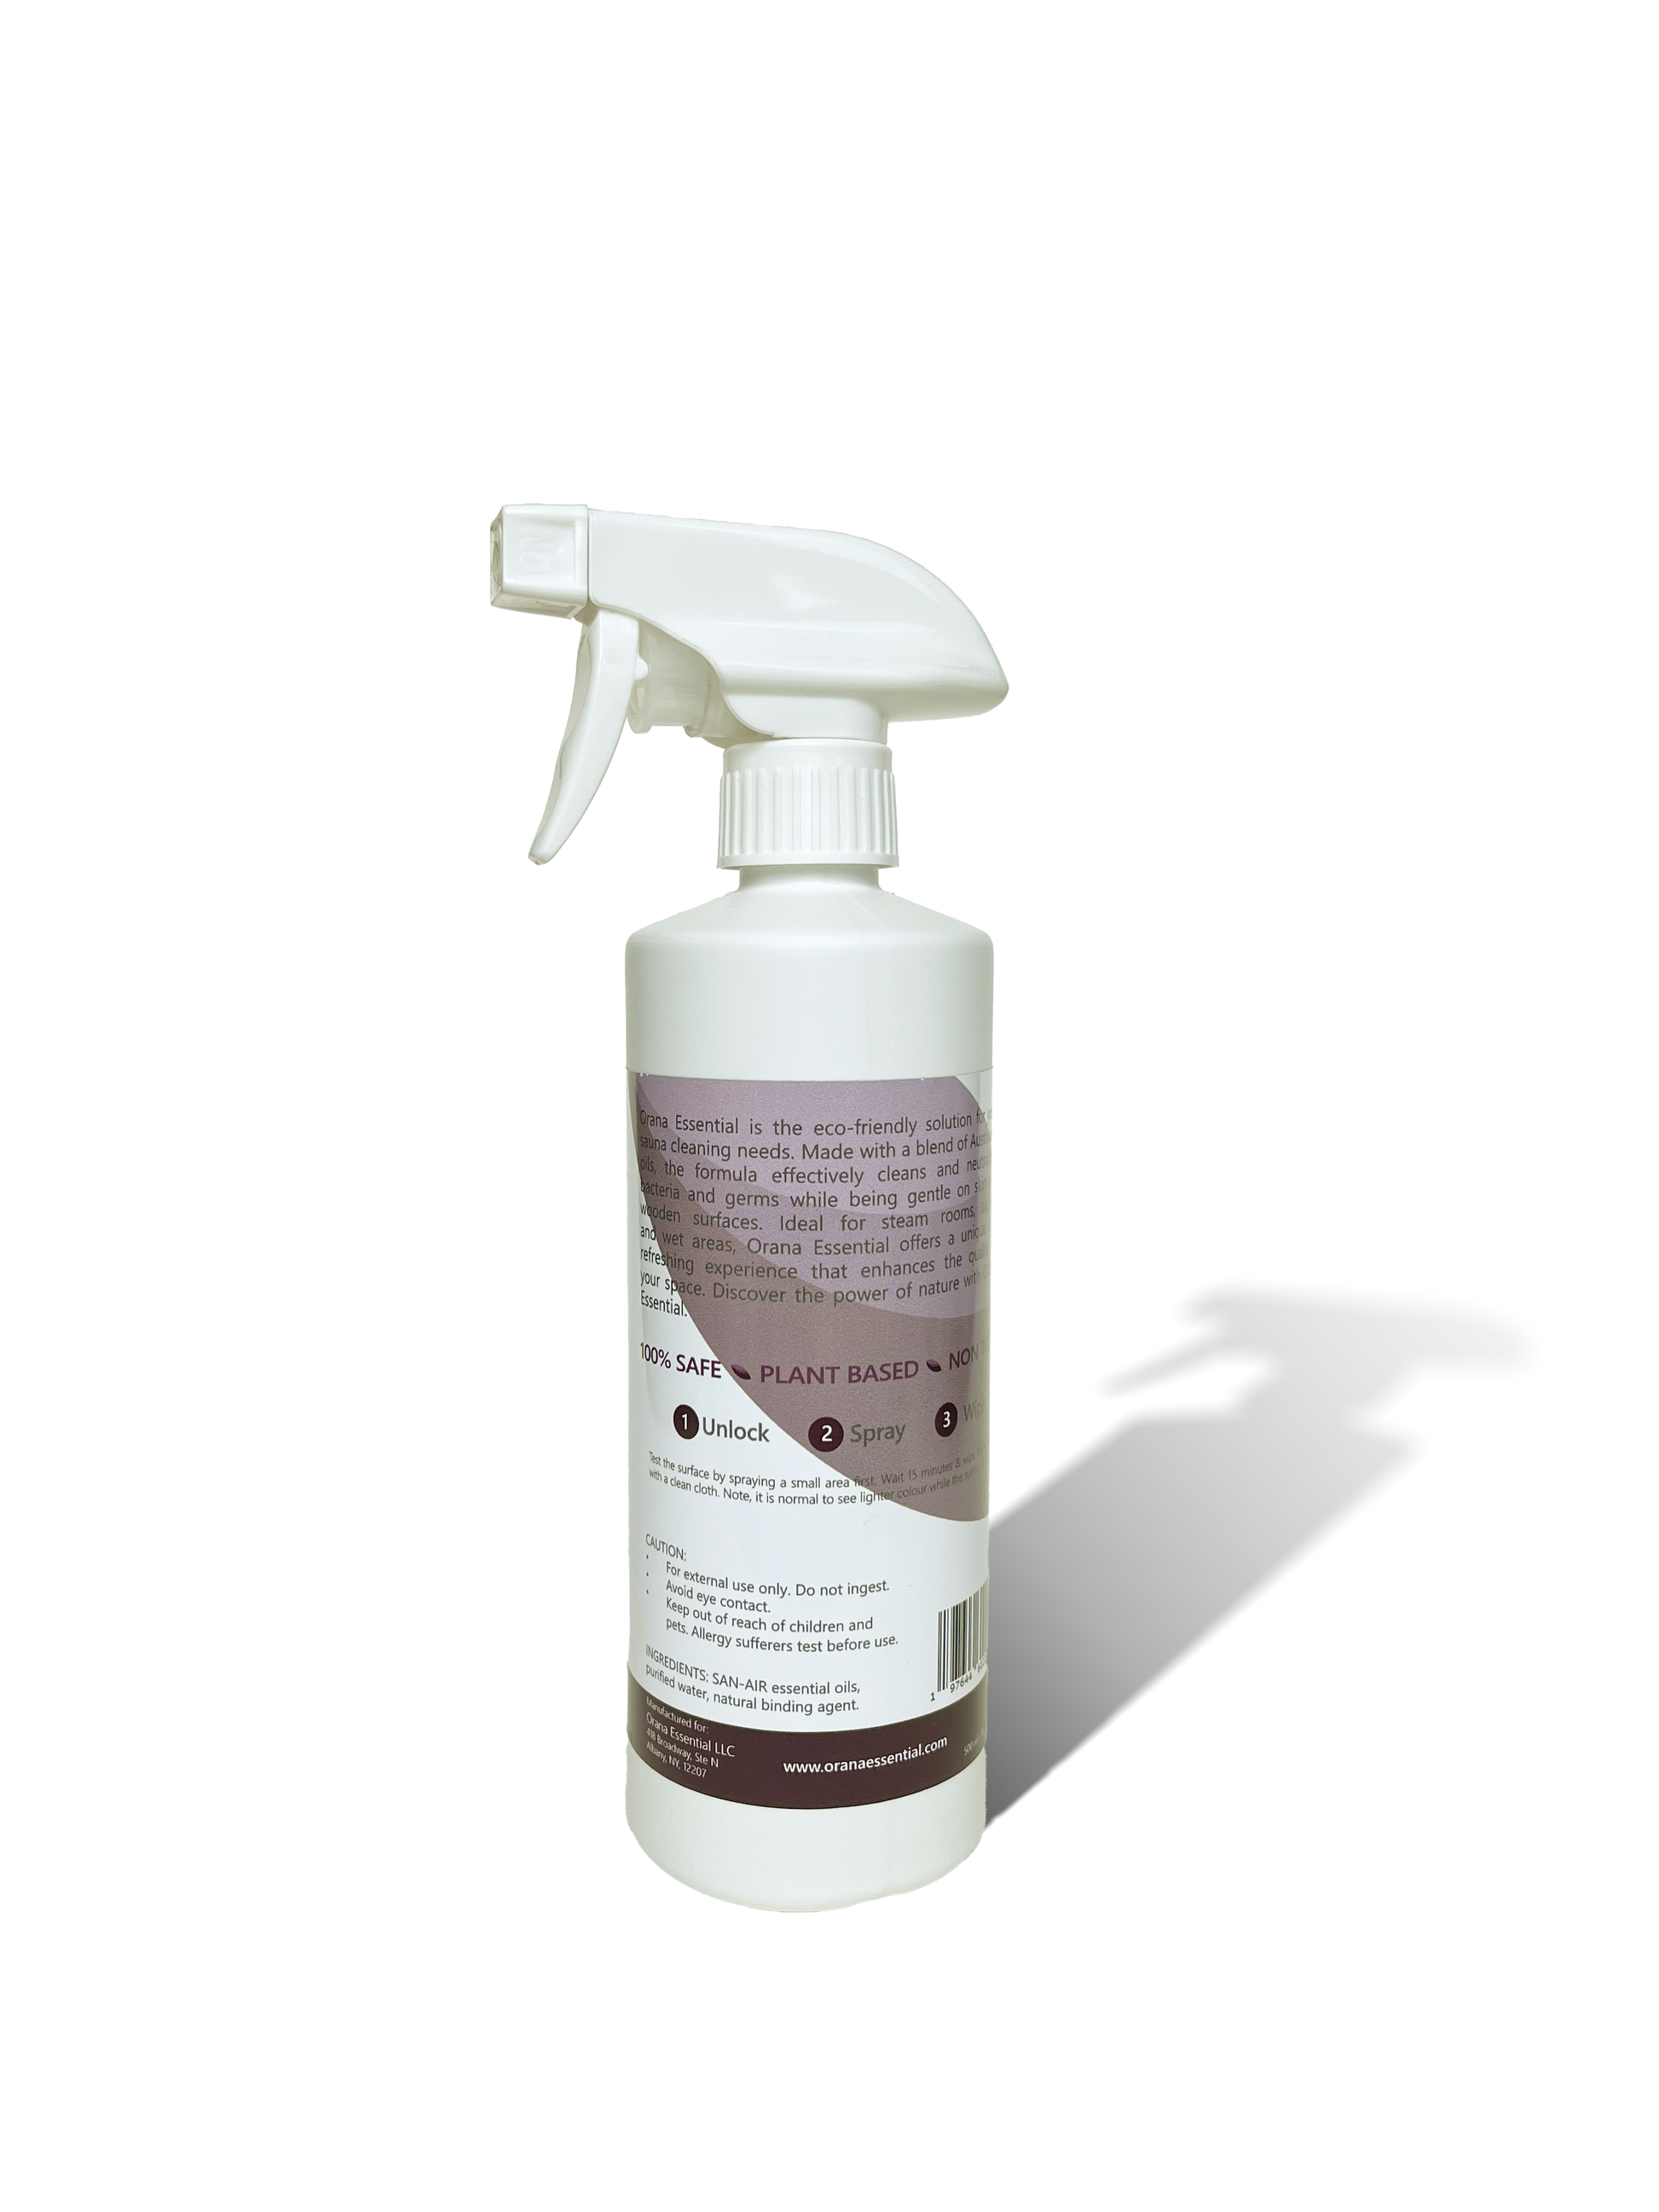 Picture of the Sauna cleaning solution, green product, eco friendly, chemical free. Best for wood cleaning. This is the bacj of the bottle